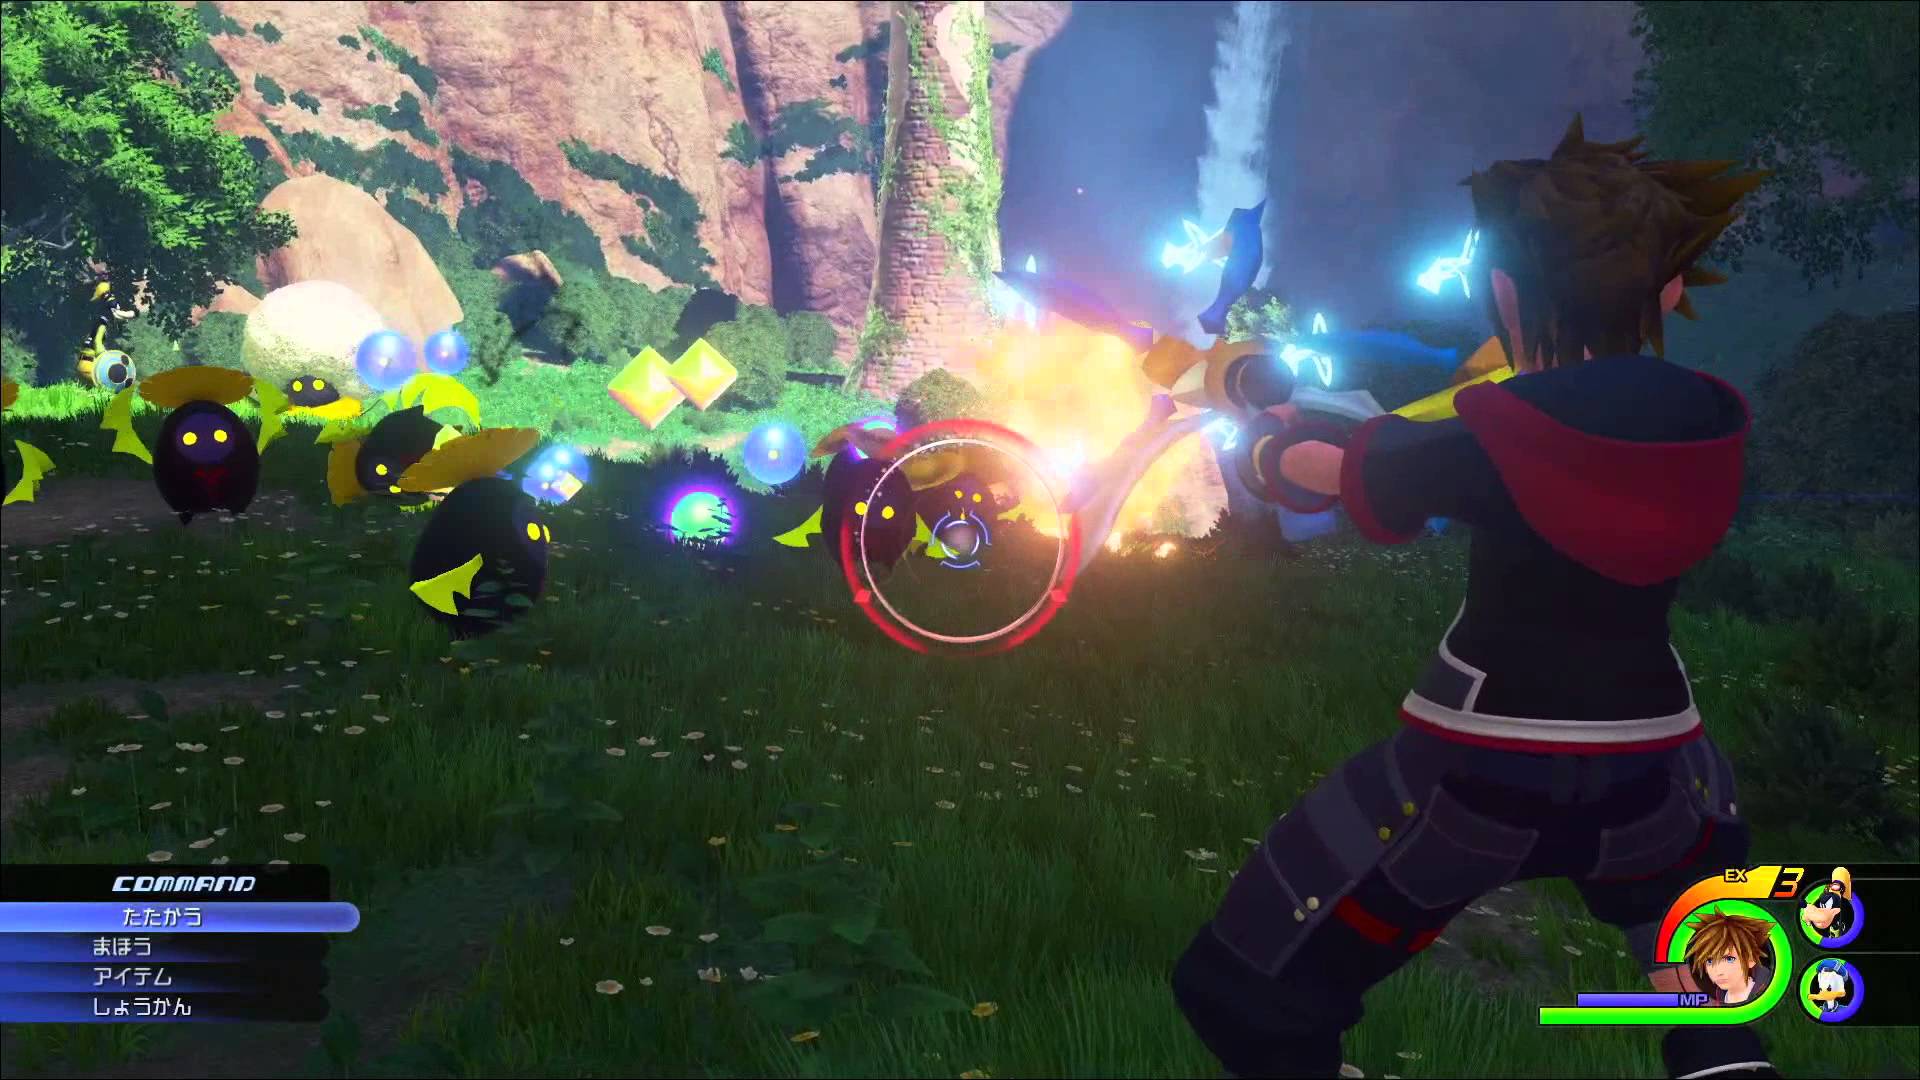 Kingdom Hearts III To Be Shown At E3 2017; To Release Next Year